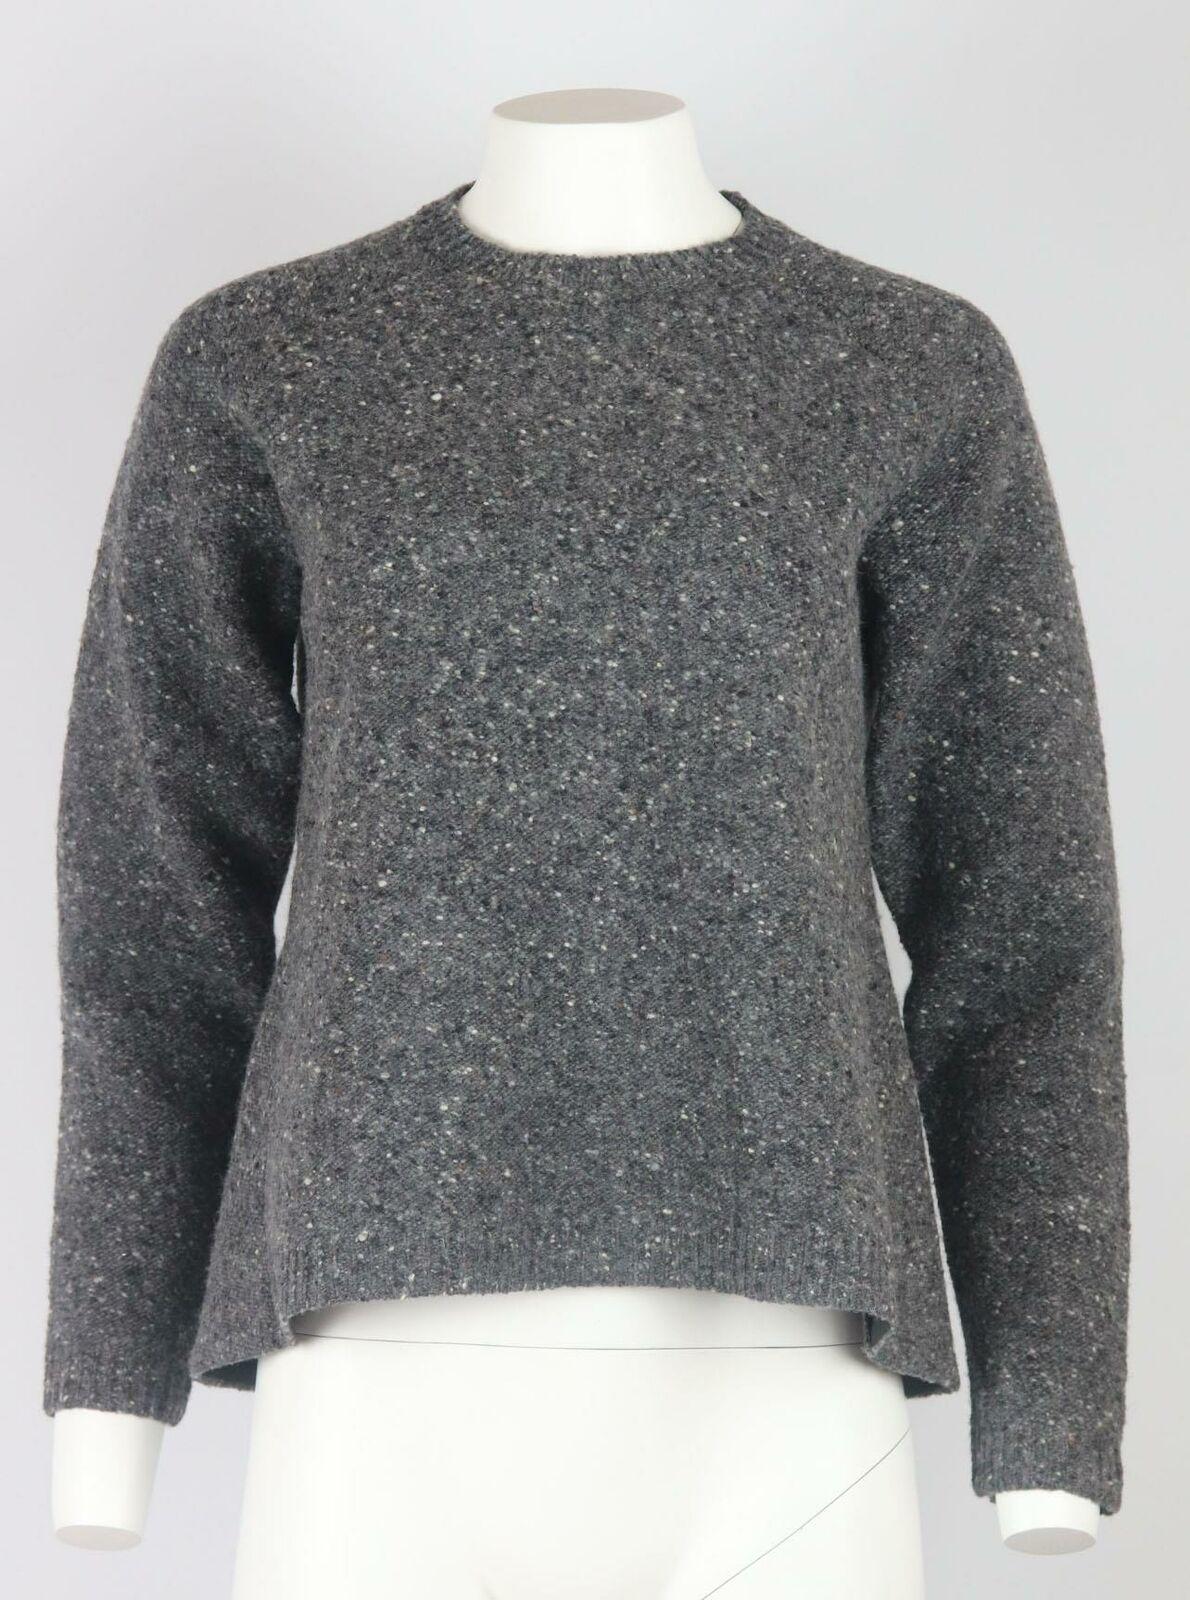 Valentino's sweater is designed in a classic crew-neck shape at the front and slight peplum silhouette at the back, it's been made in Italy from wool that's blended with tonal grey textured tones.
Grey wool.
Slips on.
100% Wool.

Size: Small (UK 8,